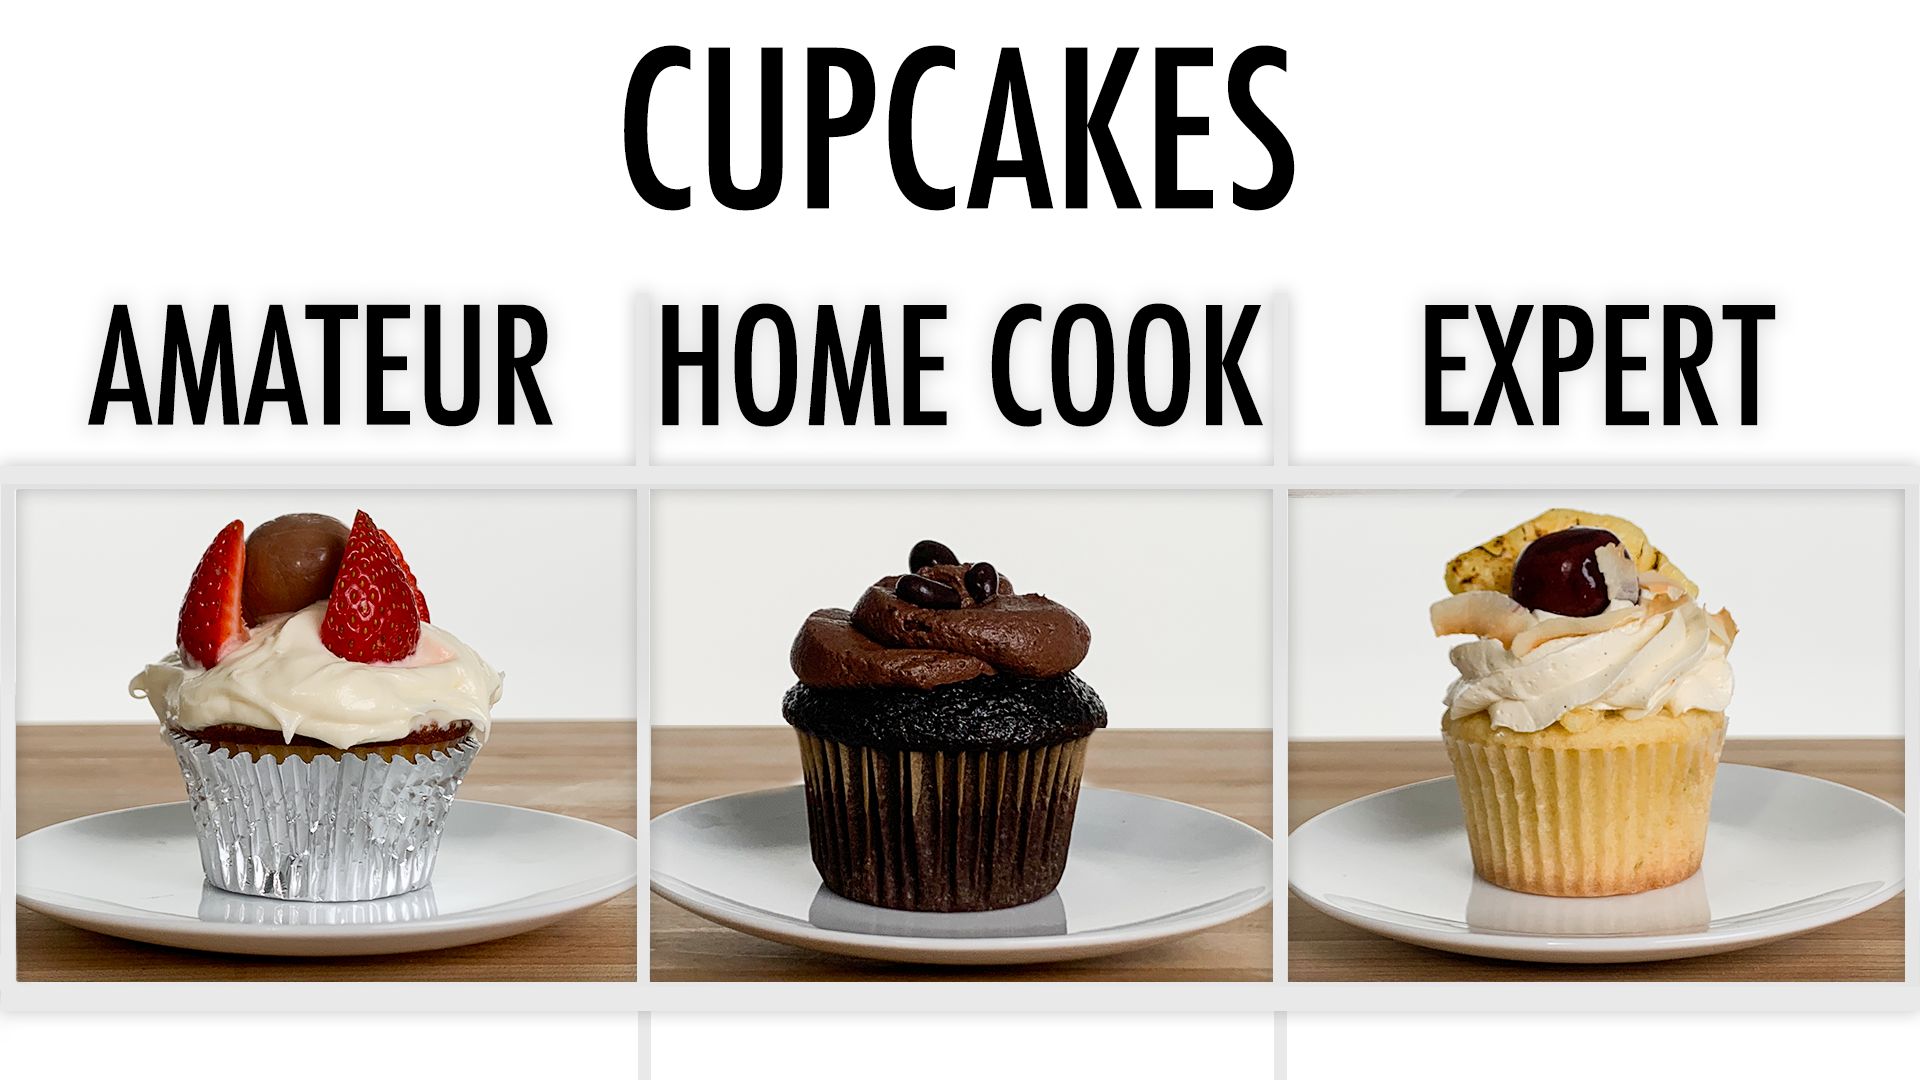 Watch 4 Levels Of Cupcakes Amateur To Food Scientist 4 Levels Epicurious